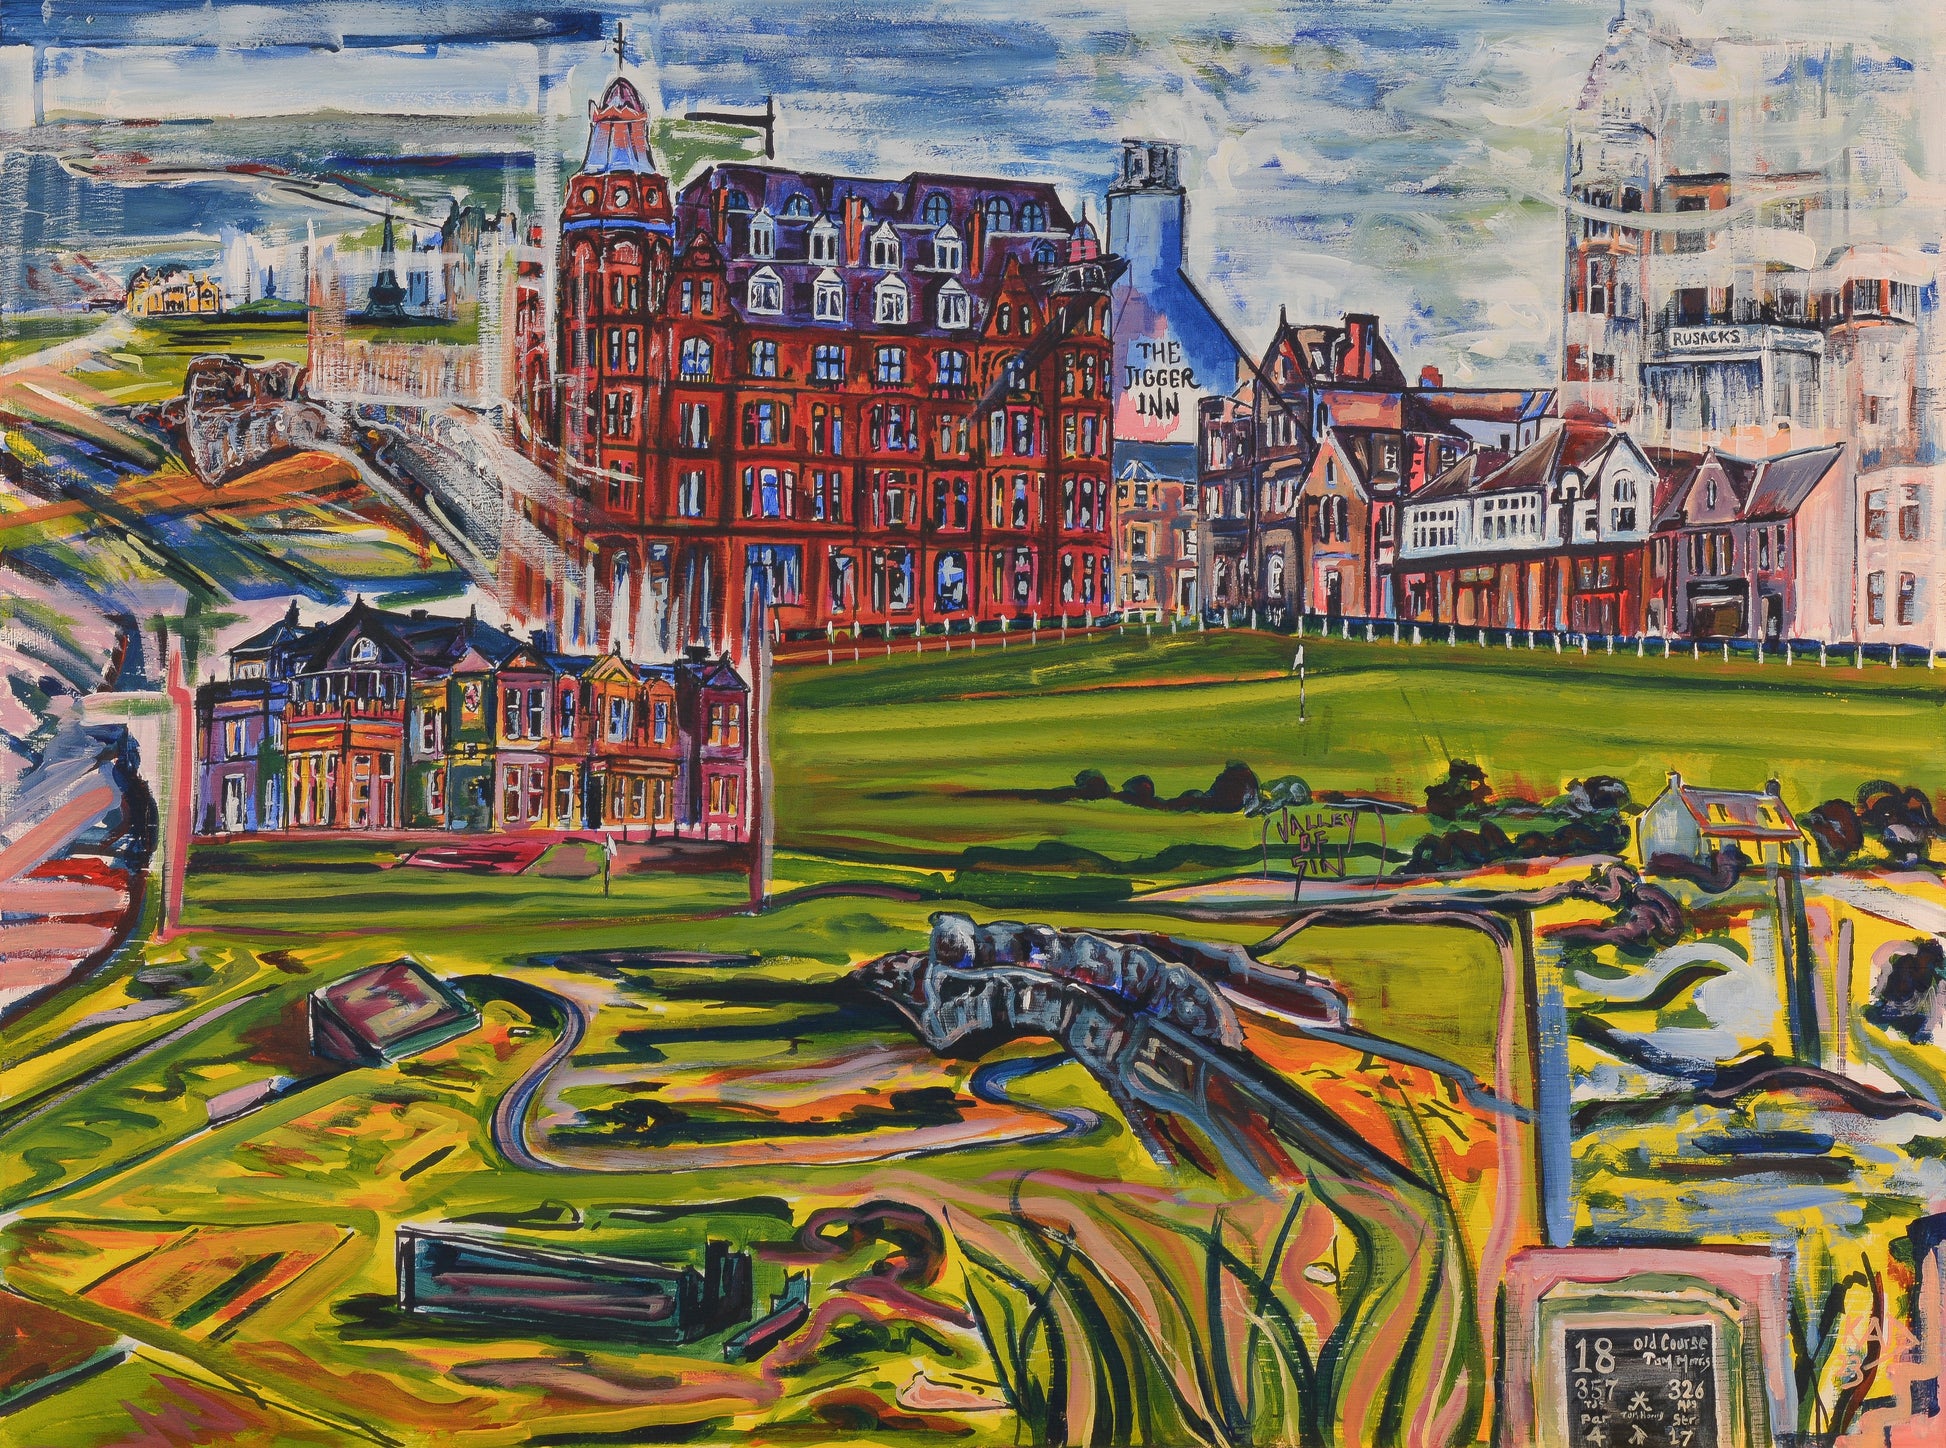 The Old course St Andrews painting.